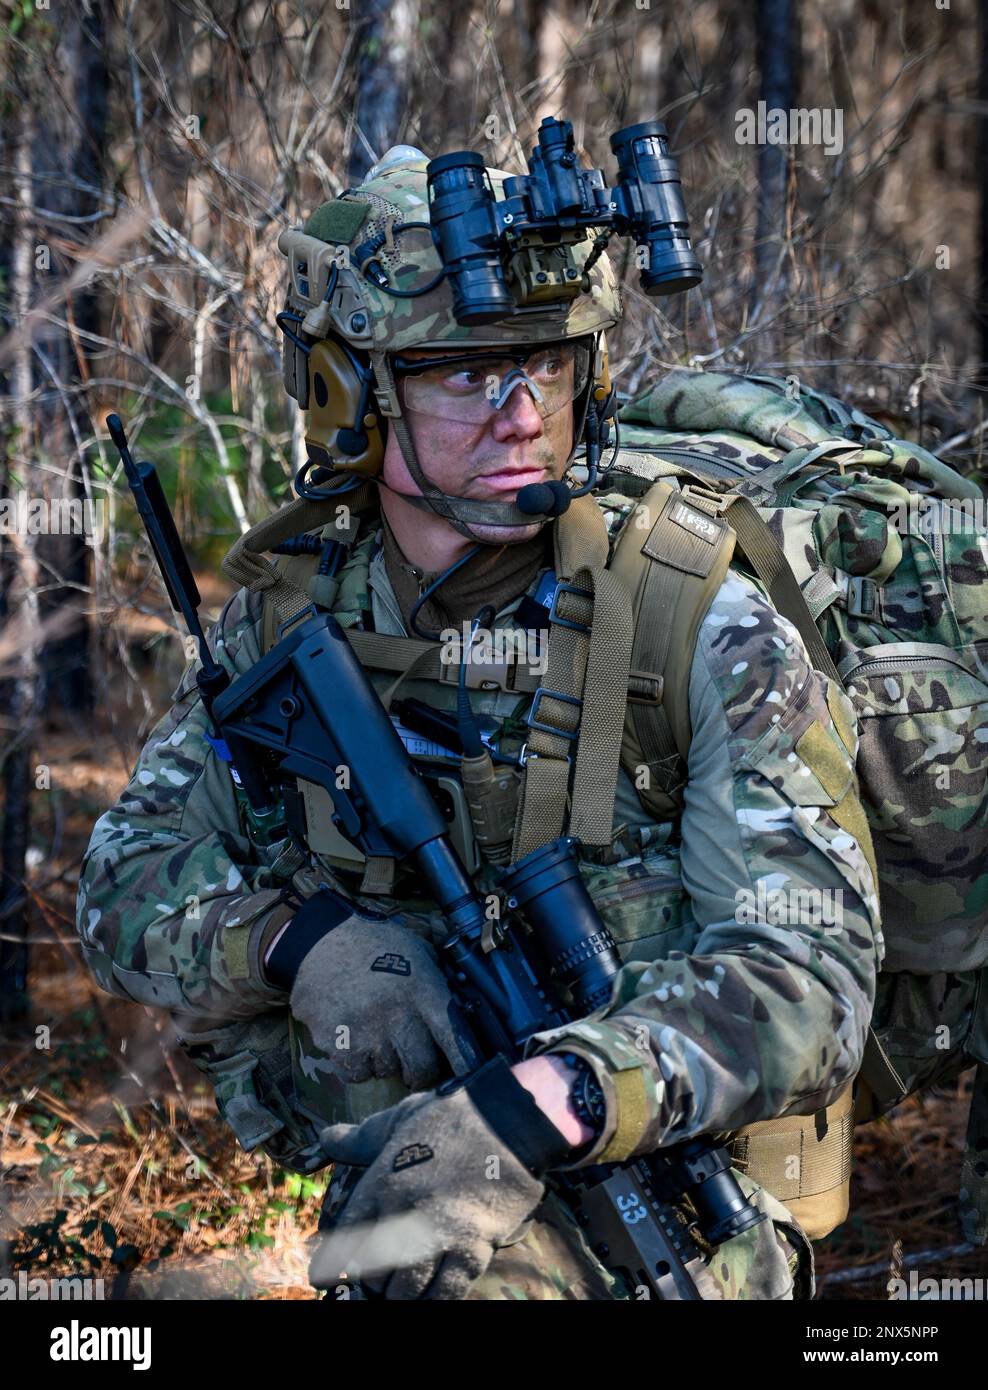 A U.S. Airman from the 165th Air Support Operations Squadron secures his location at Townsend Bombing Range, Georgia, while working as a sensing and effects team during exercise Sunshine Rescue on Jan. 24, 2023. The goal of the Sunshine Rescue 2023 exercise is to execute traditional Combat Search and Rescue (CSAR) capabilities with forward-edge ground force tactics, techniques, and procedures while utilizing advanced command and control technologies. Stock Photo